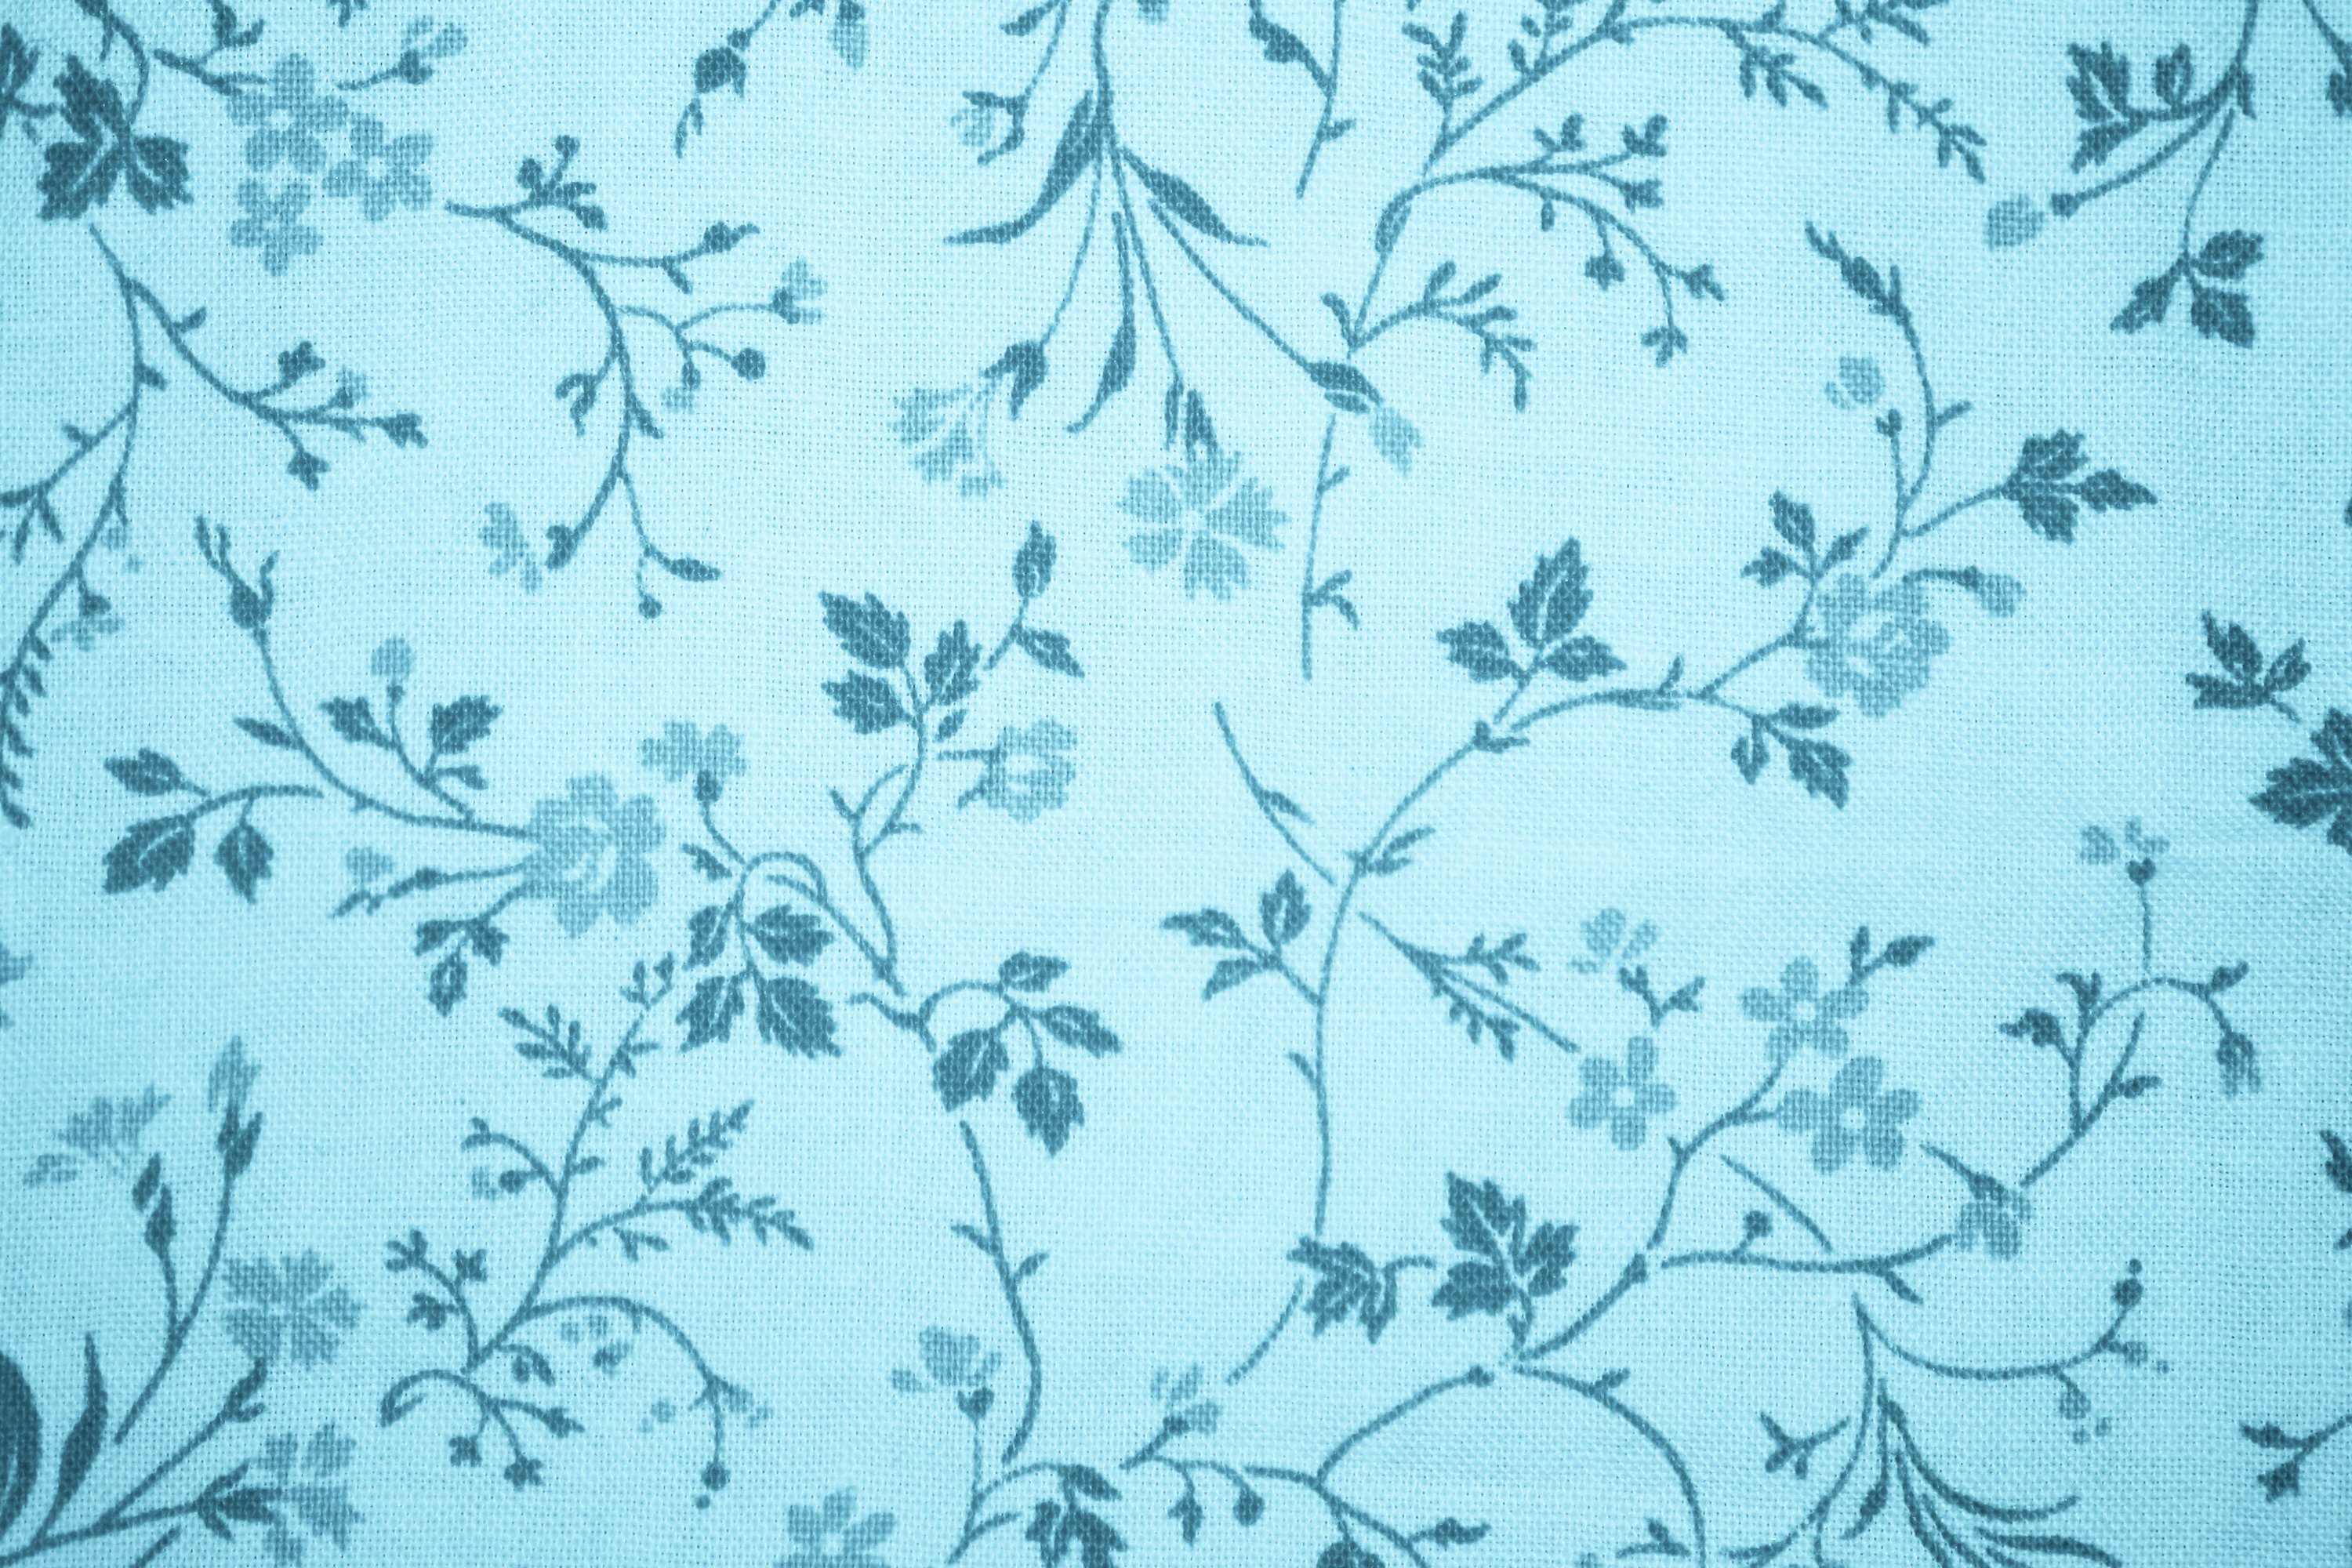 Light Blue Floral Print Fabric Texture Picture Free Photograph